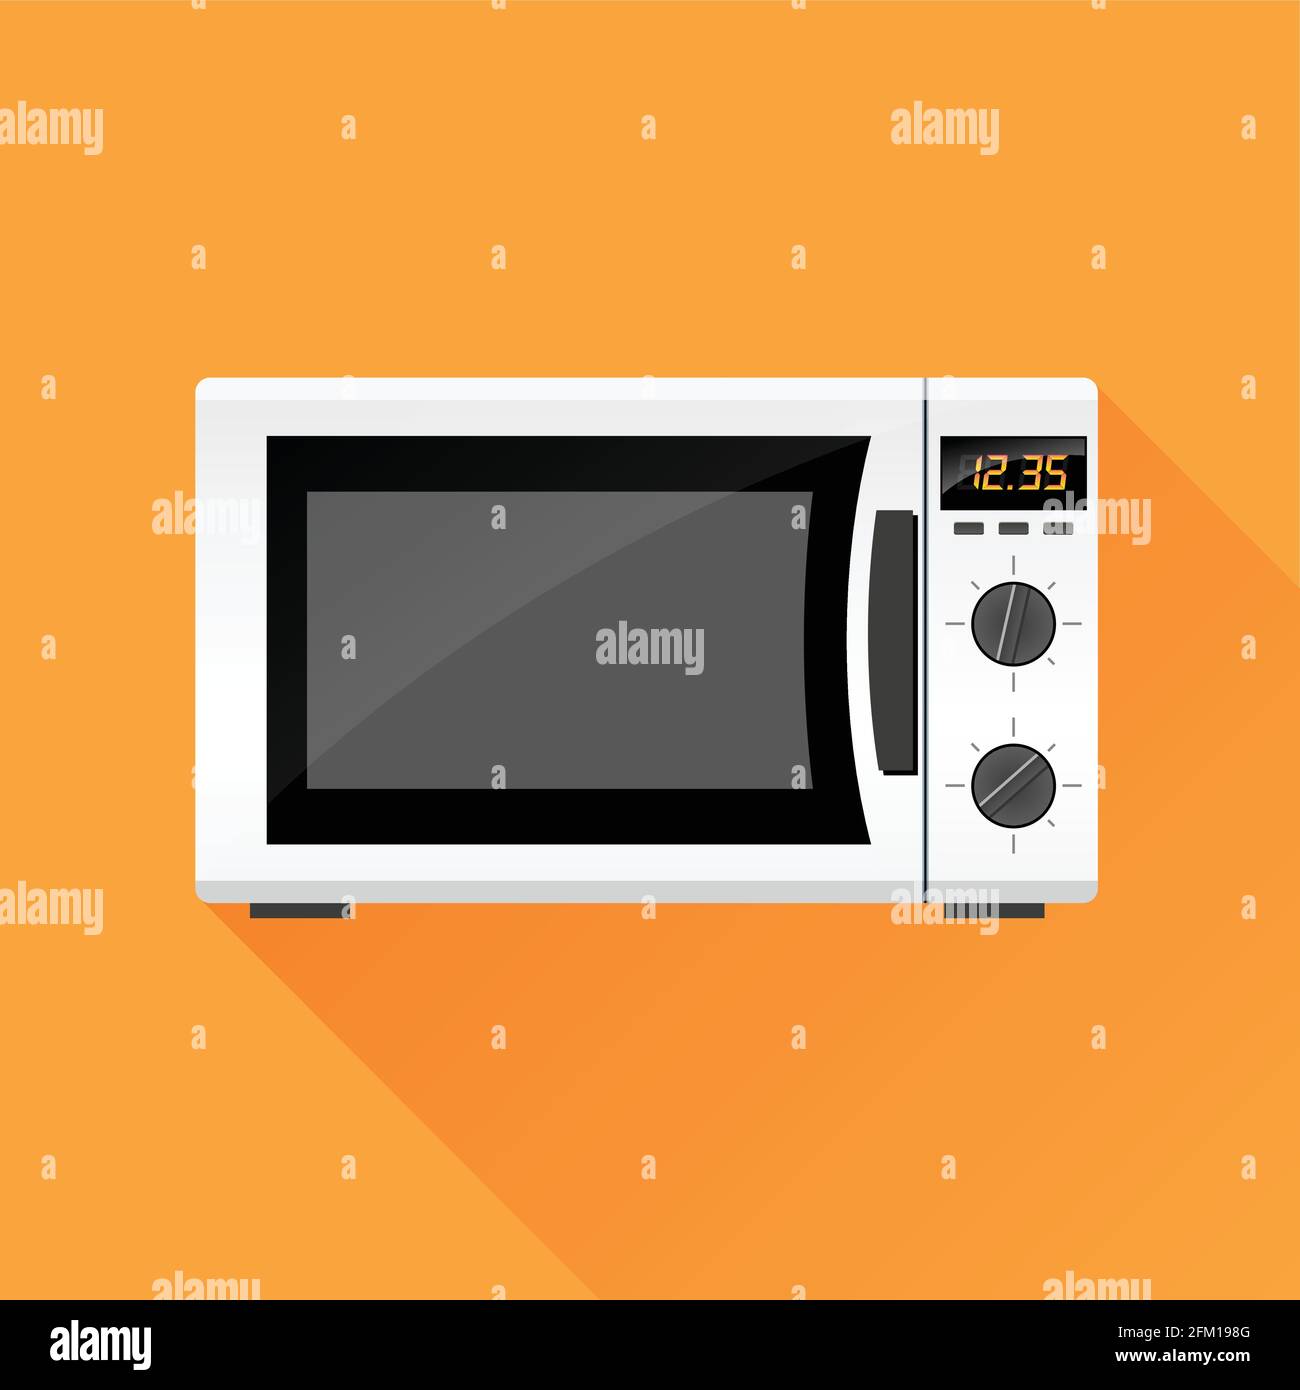 Illustration of microwave oven icon design concept Stock Vector